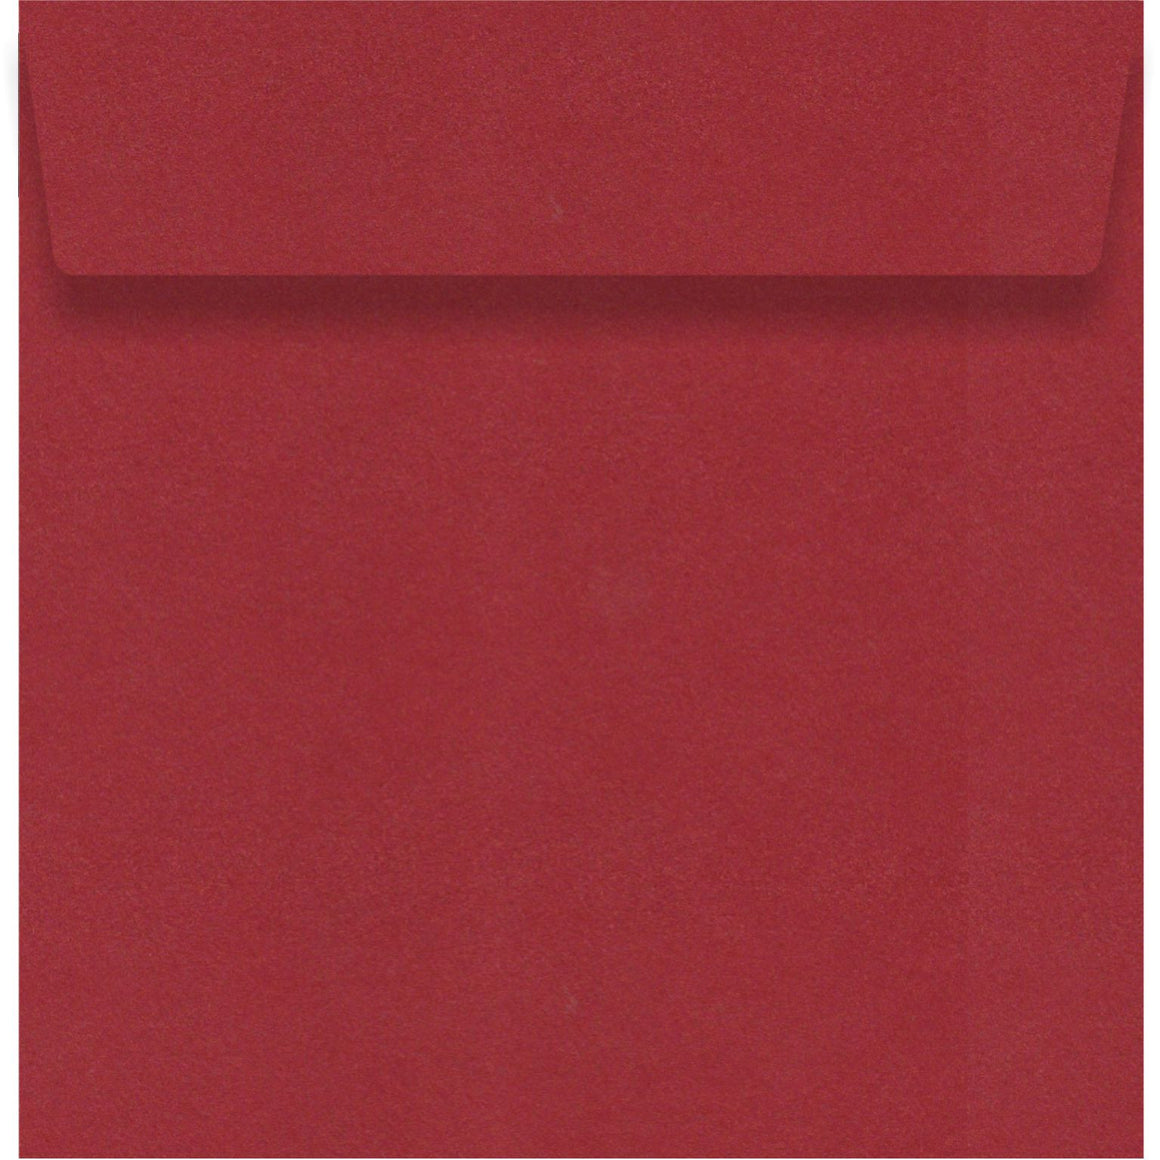 Red Lacquer 130 x 130mm